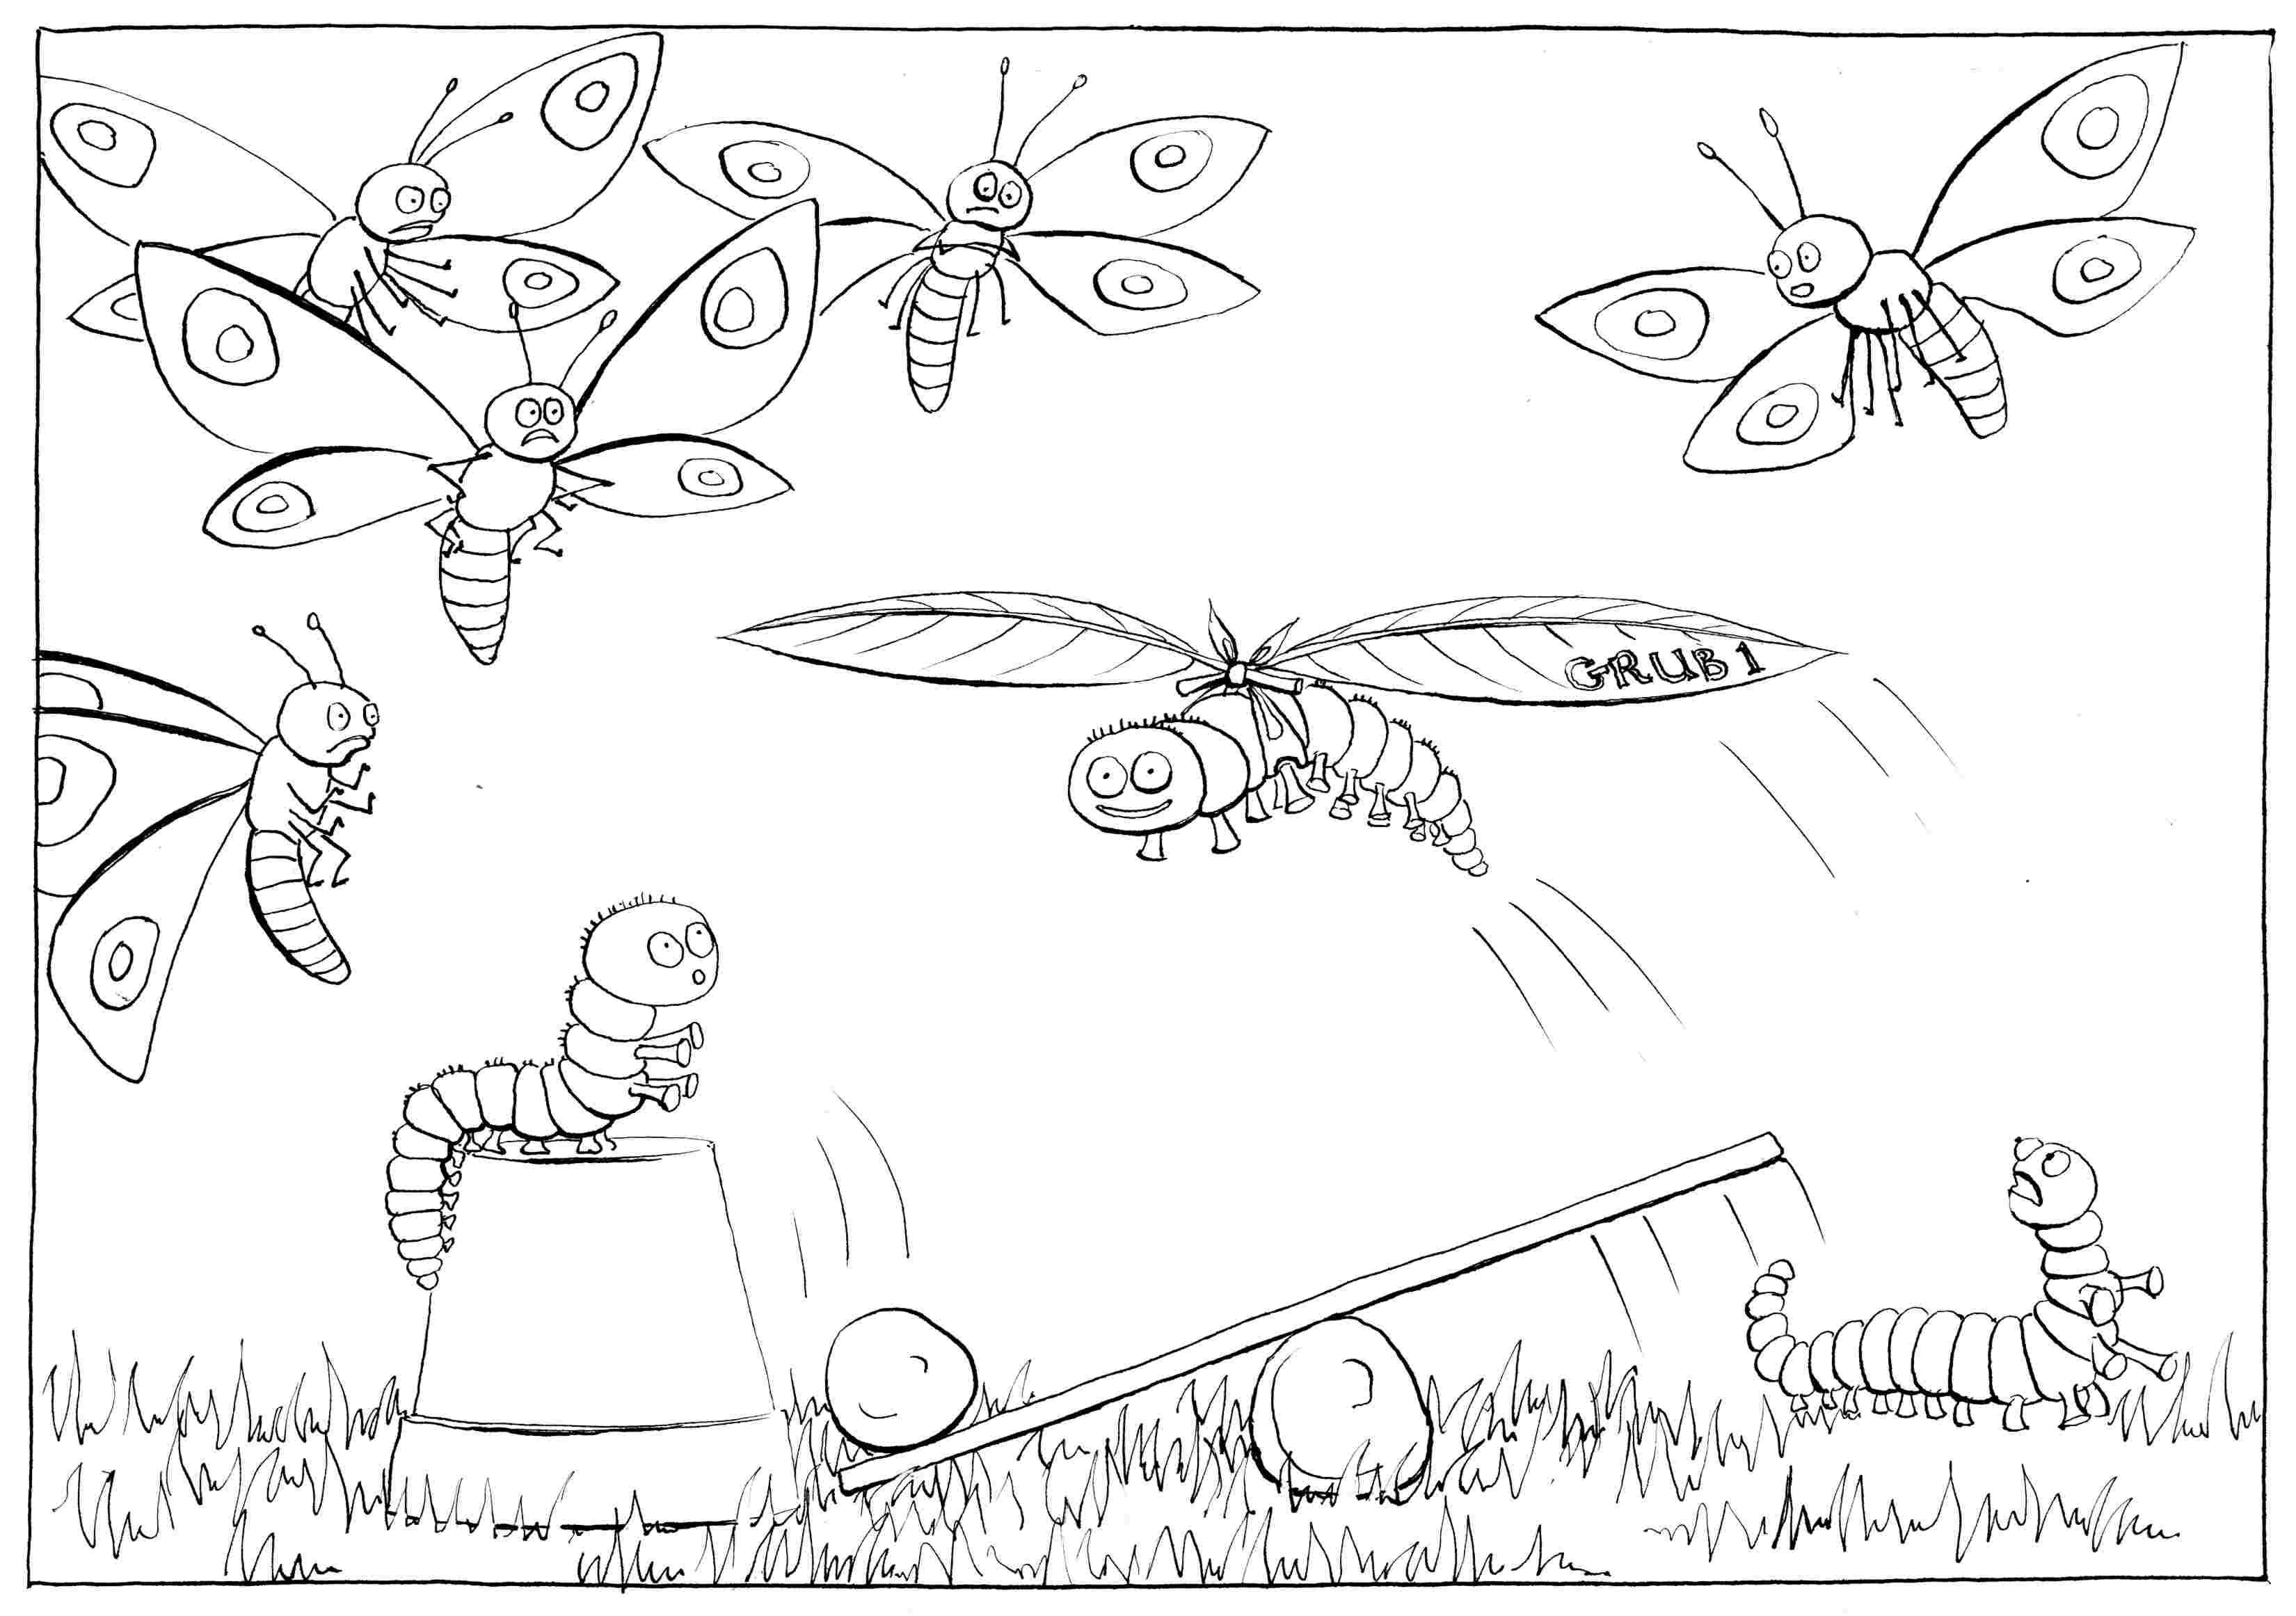 Learning to Fly: part I - colouring-in drawing - to download, right click and save, print out and colour in!